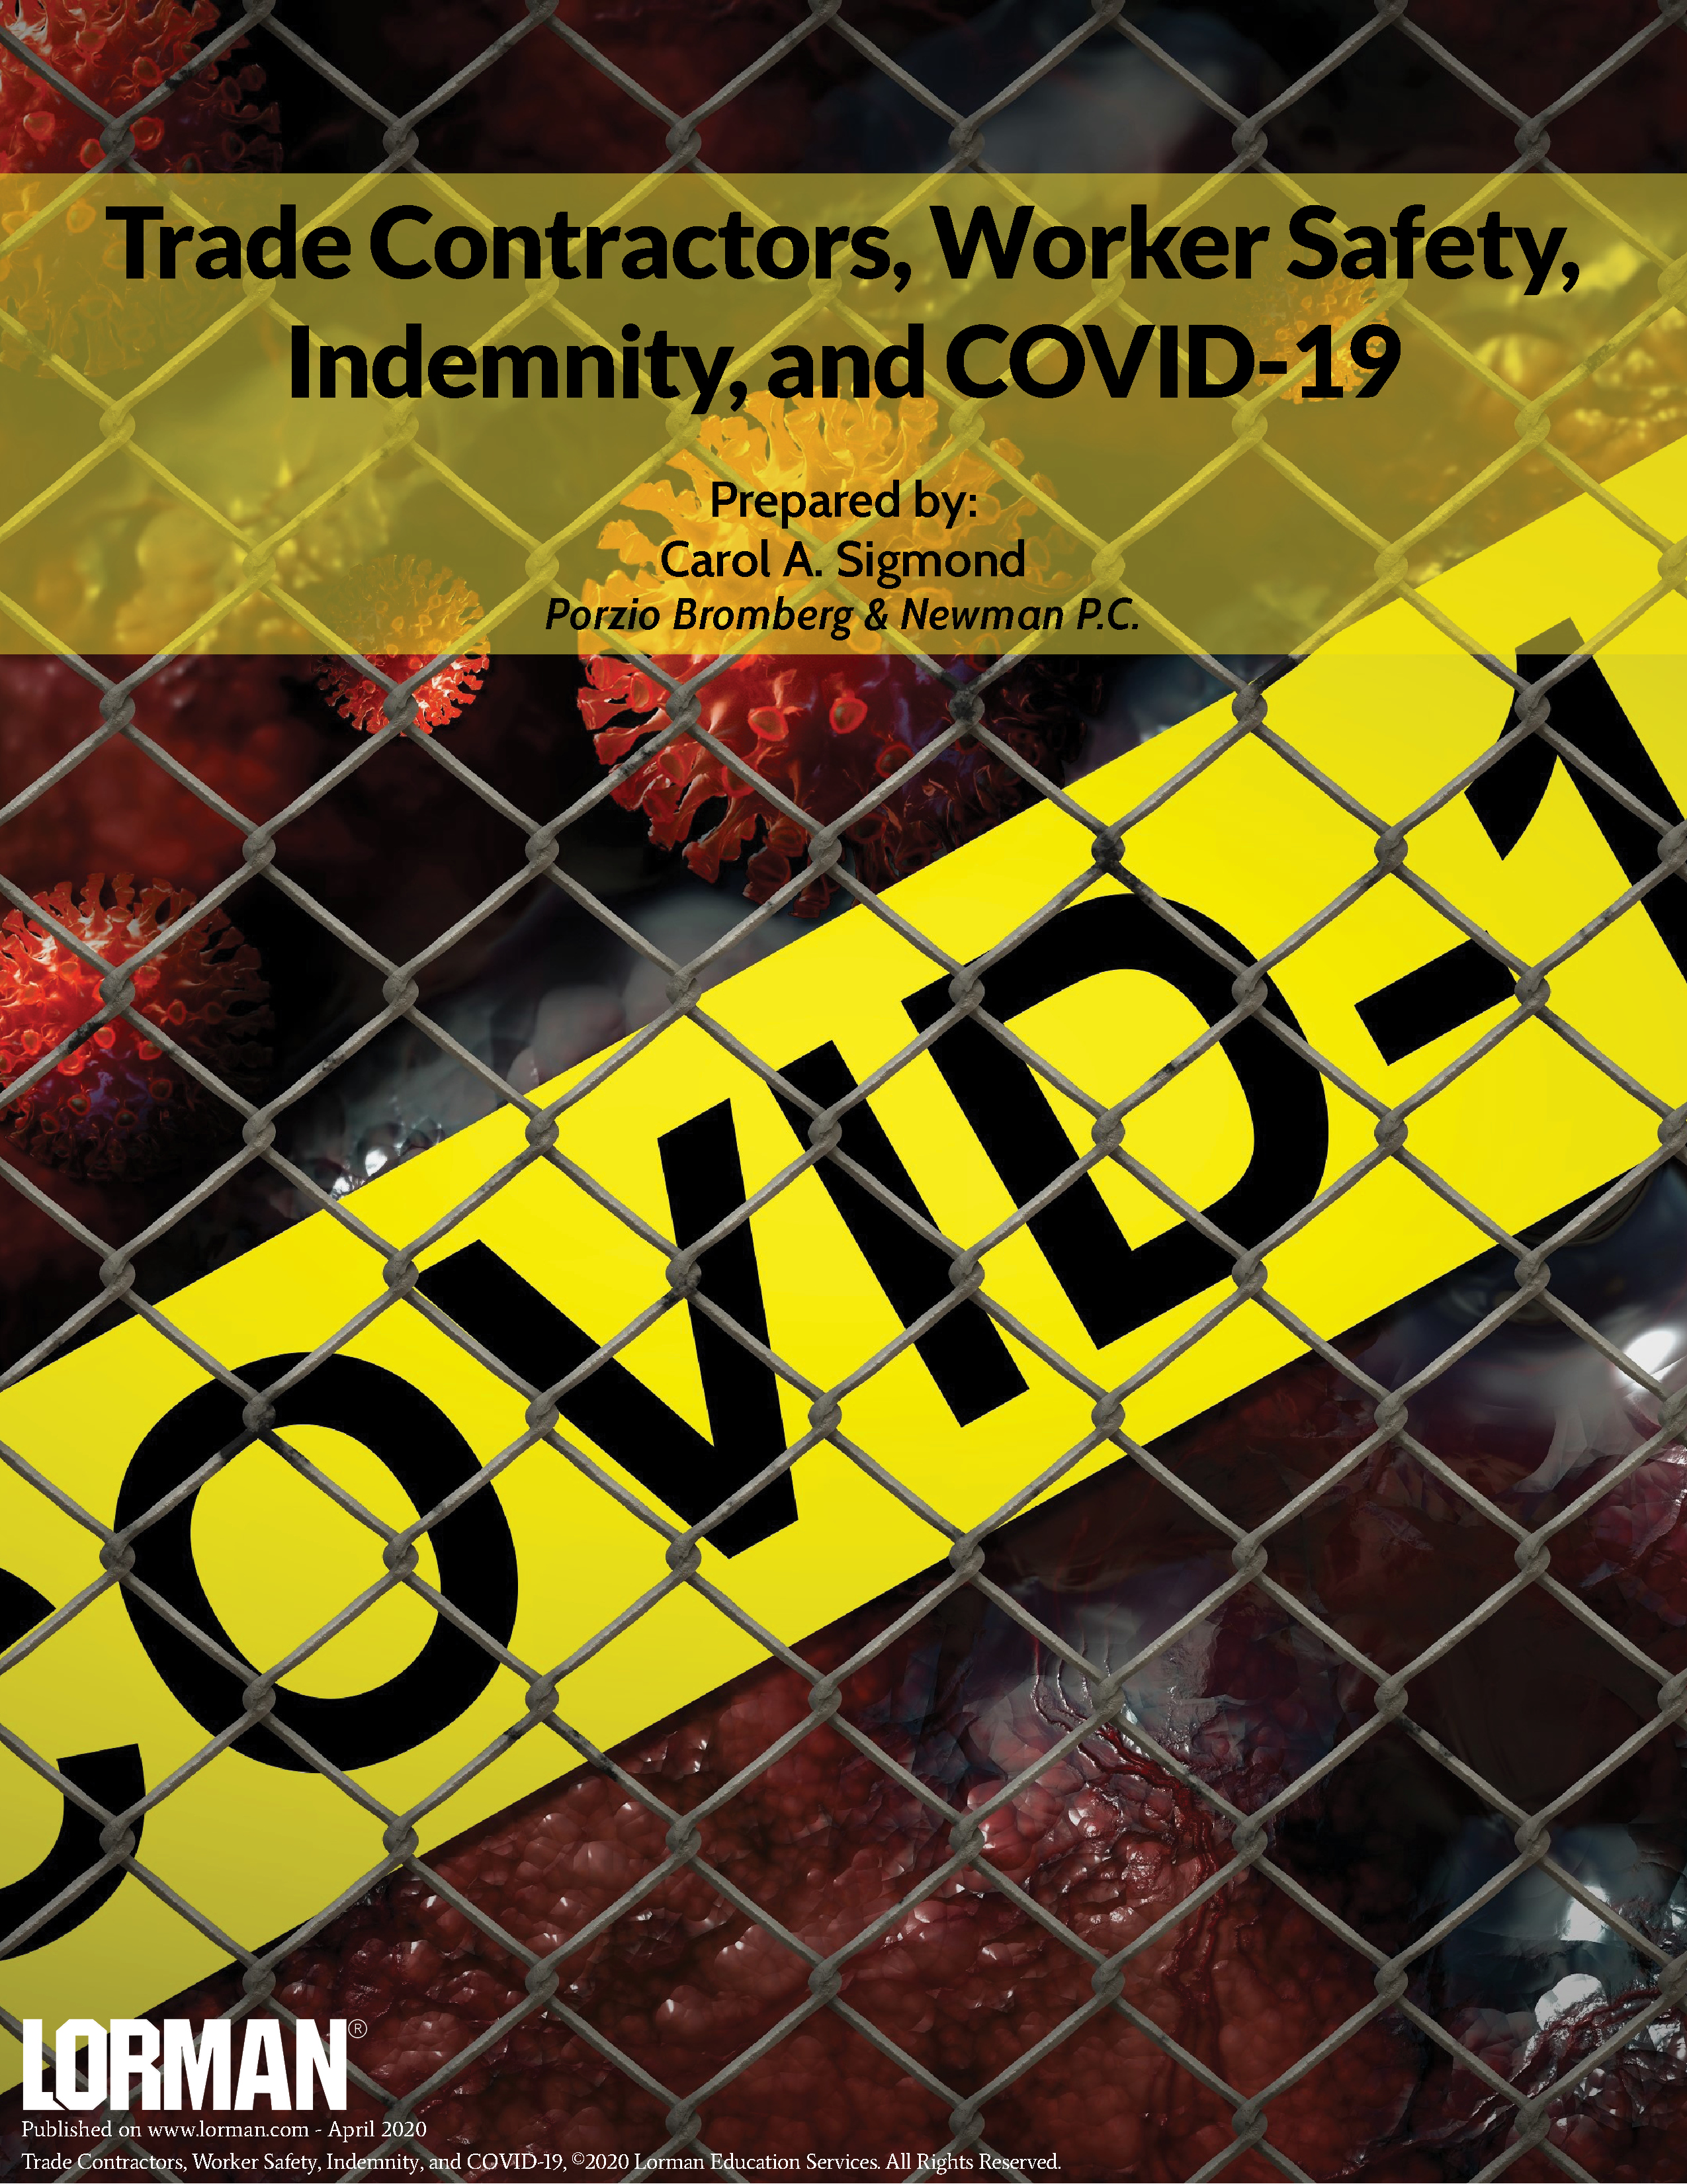 Trade Contractors, Worker Safety, Indemnity, and COVID-19